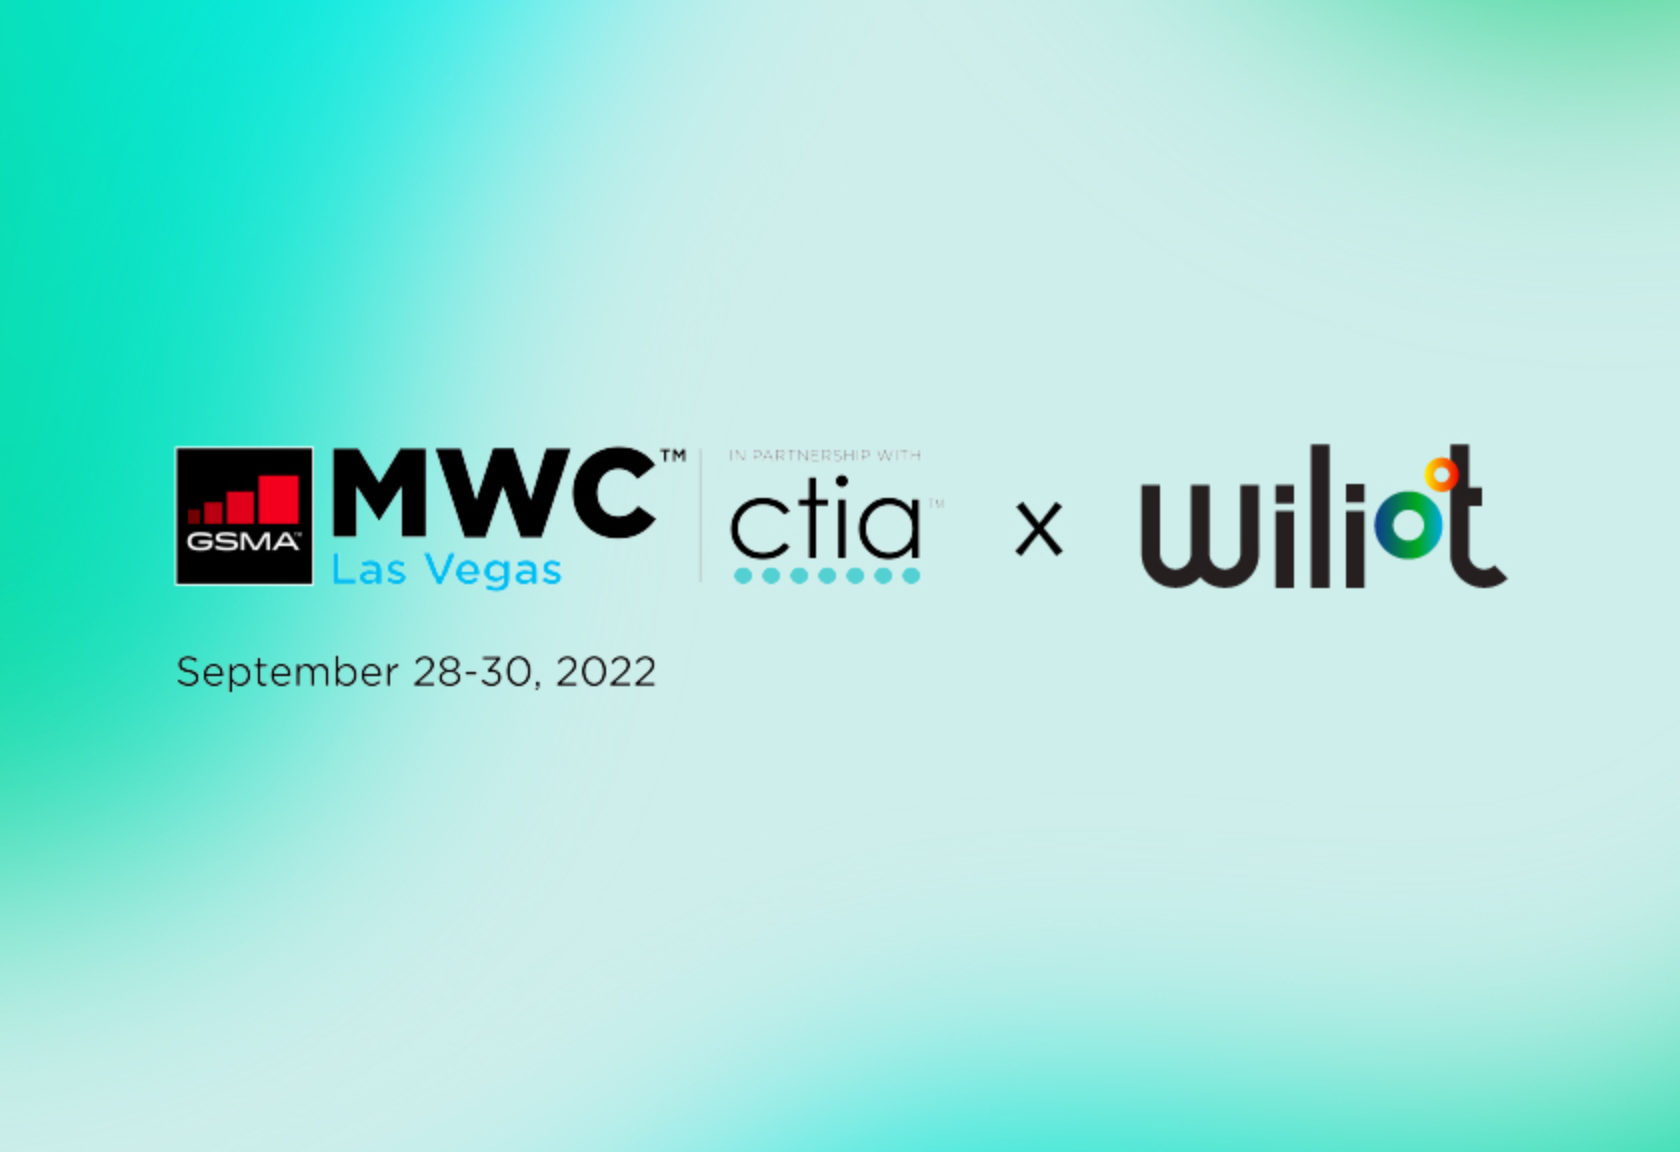 Join Wiliot at Mobile World Congress